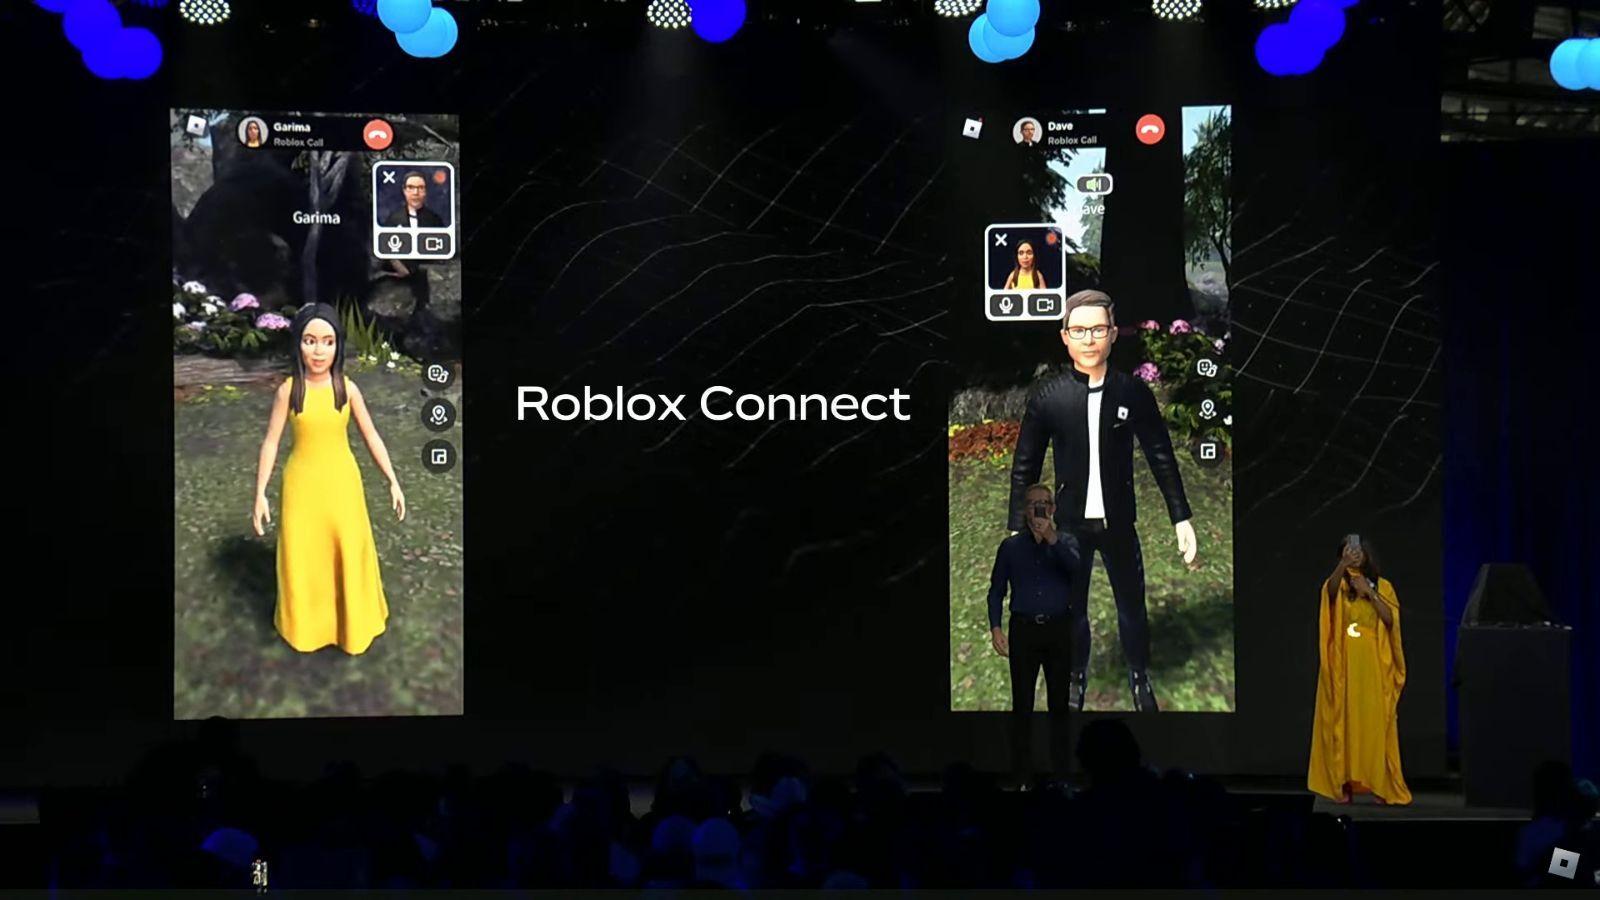 The future is now with Roblox avatar real-time facial animation